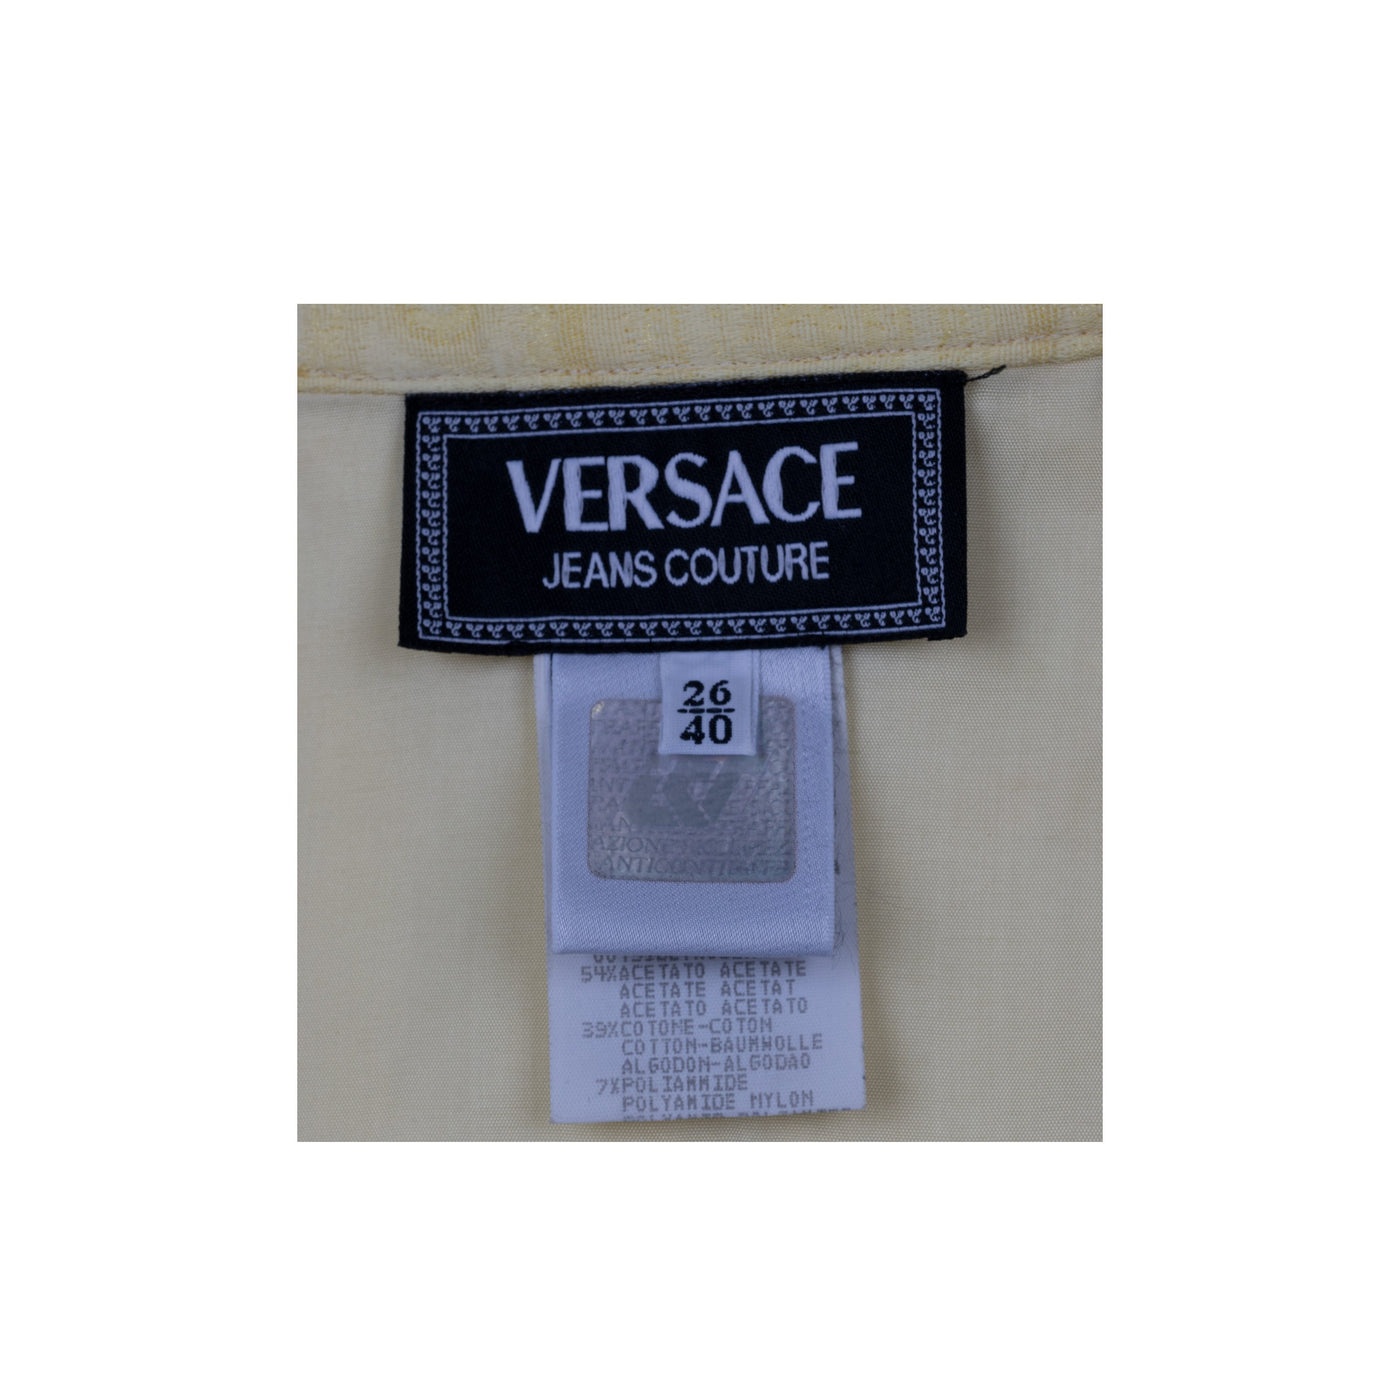 Secondhand Versace Jean Couture Jacket and Skirt Set